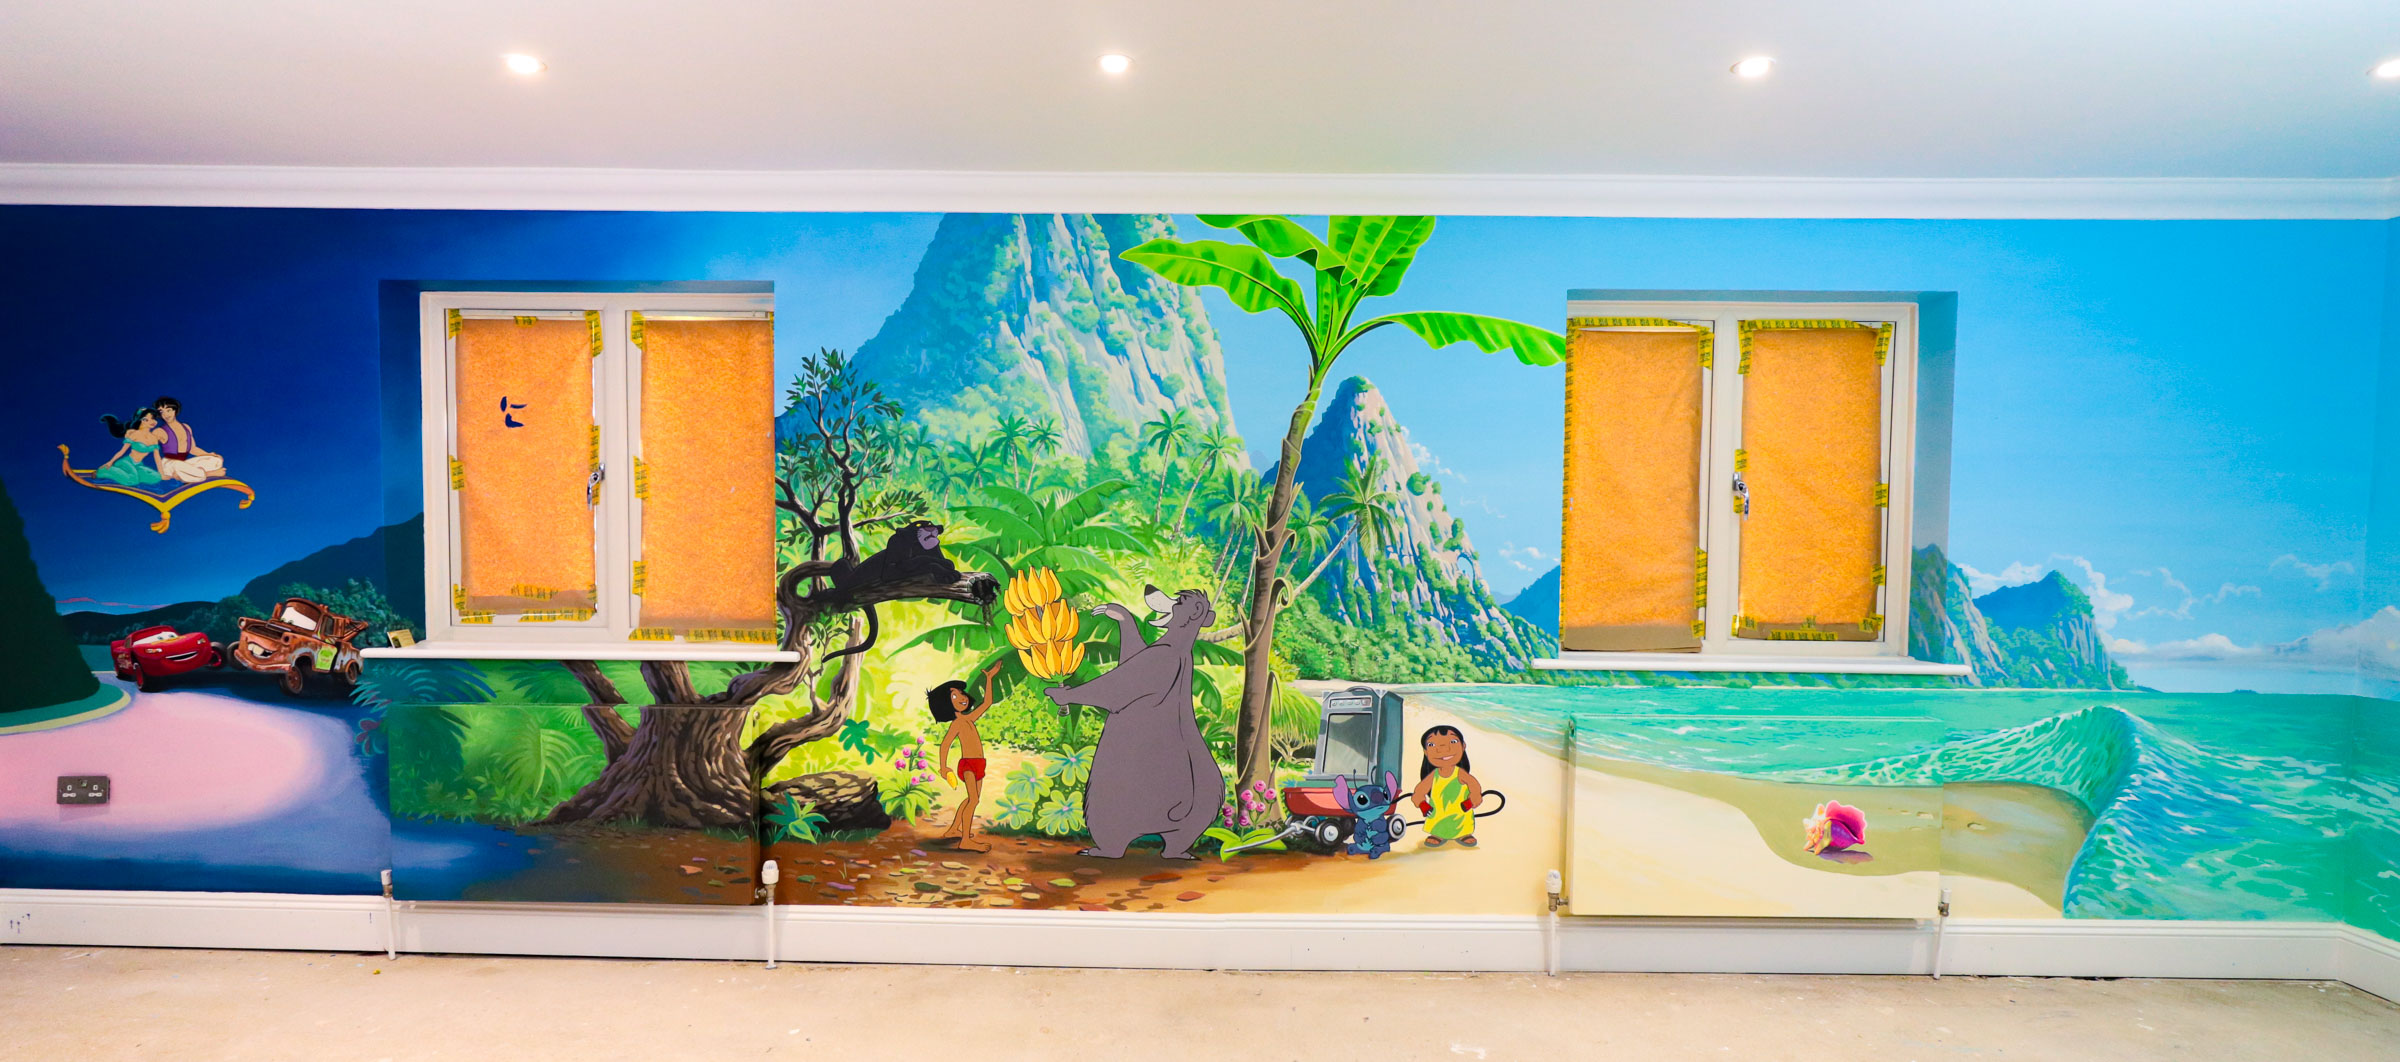 Playroom mural, Moana background scene with Ariel and the more Little Mermaid characters